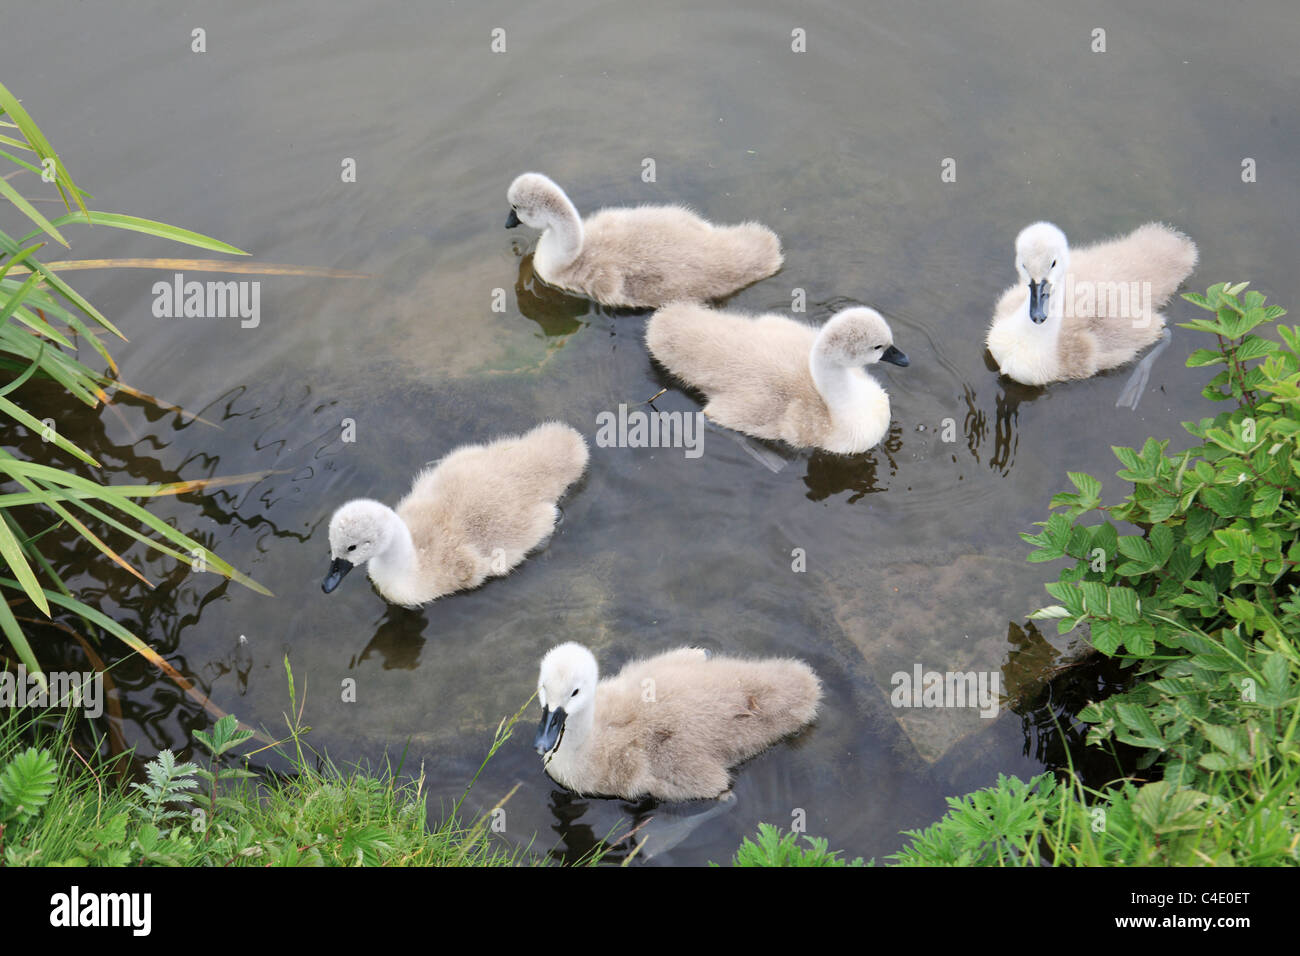 A group of young swans or cygnets seen on the Leeds and Liverpool canal near to Skipton, Yorkshire, England, UK Stock Photo